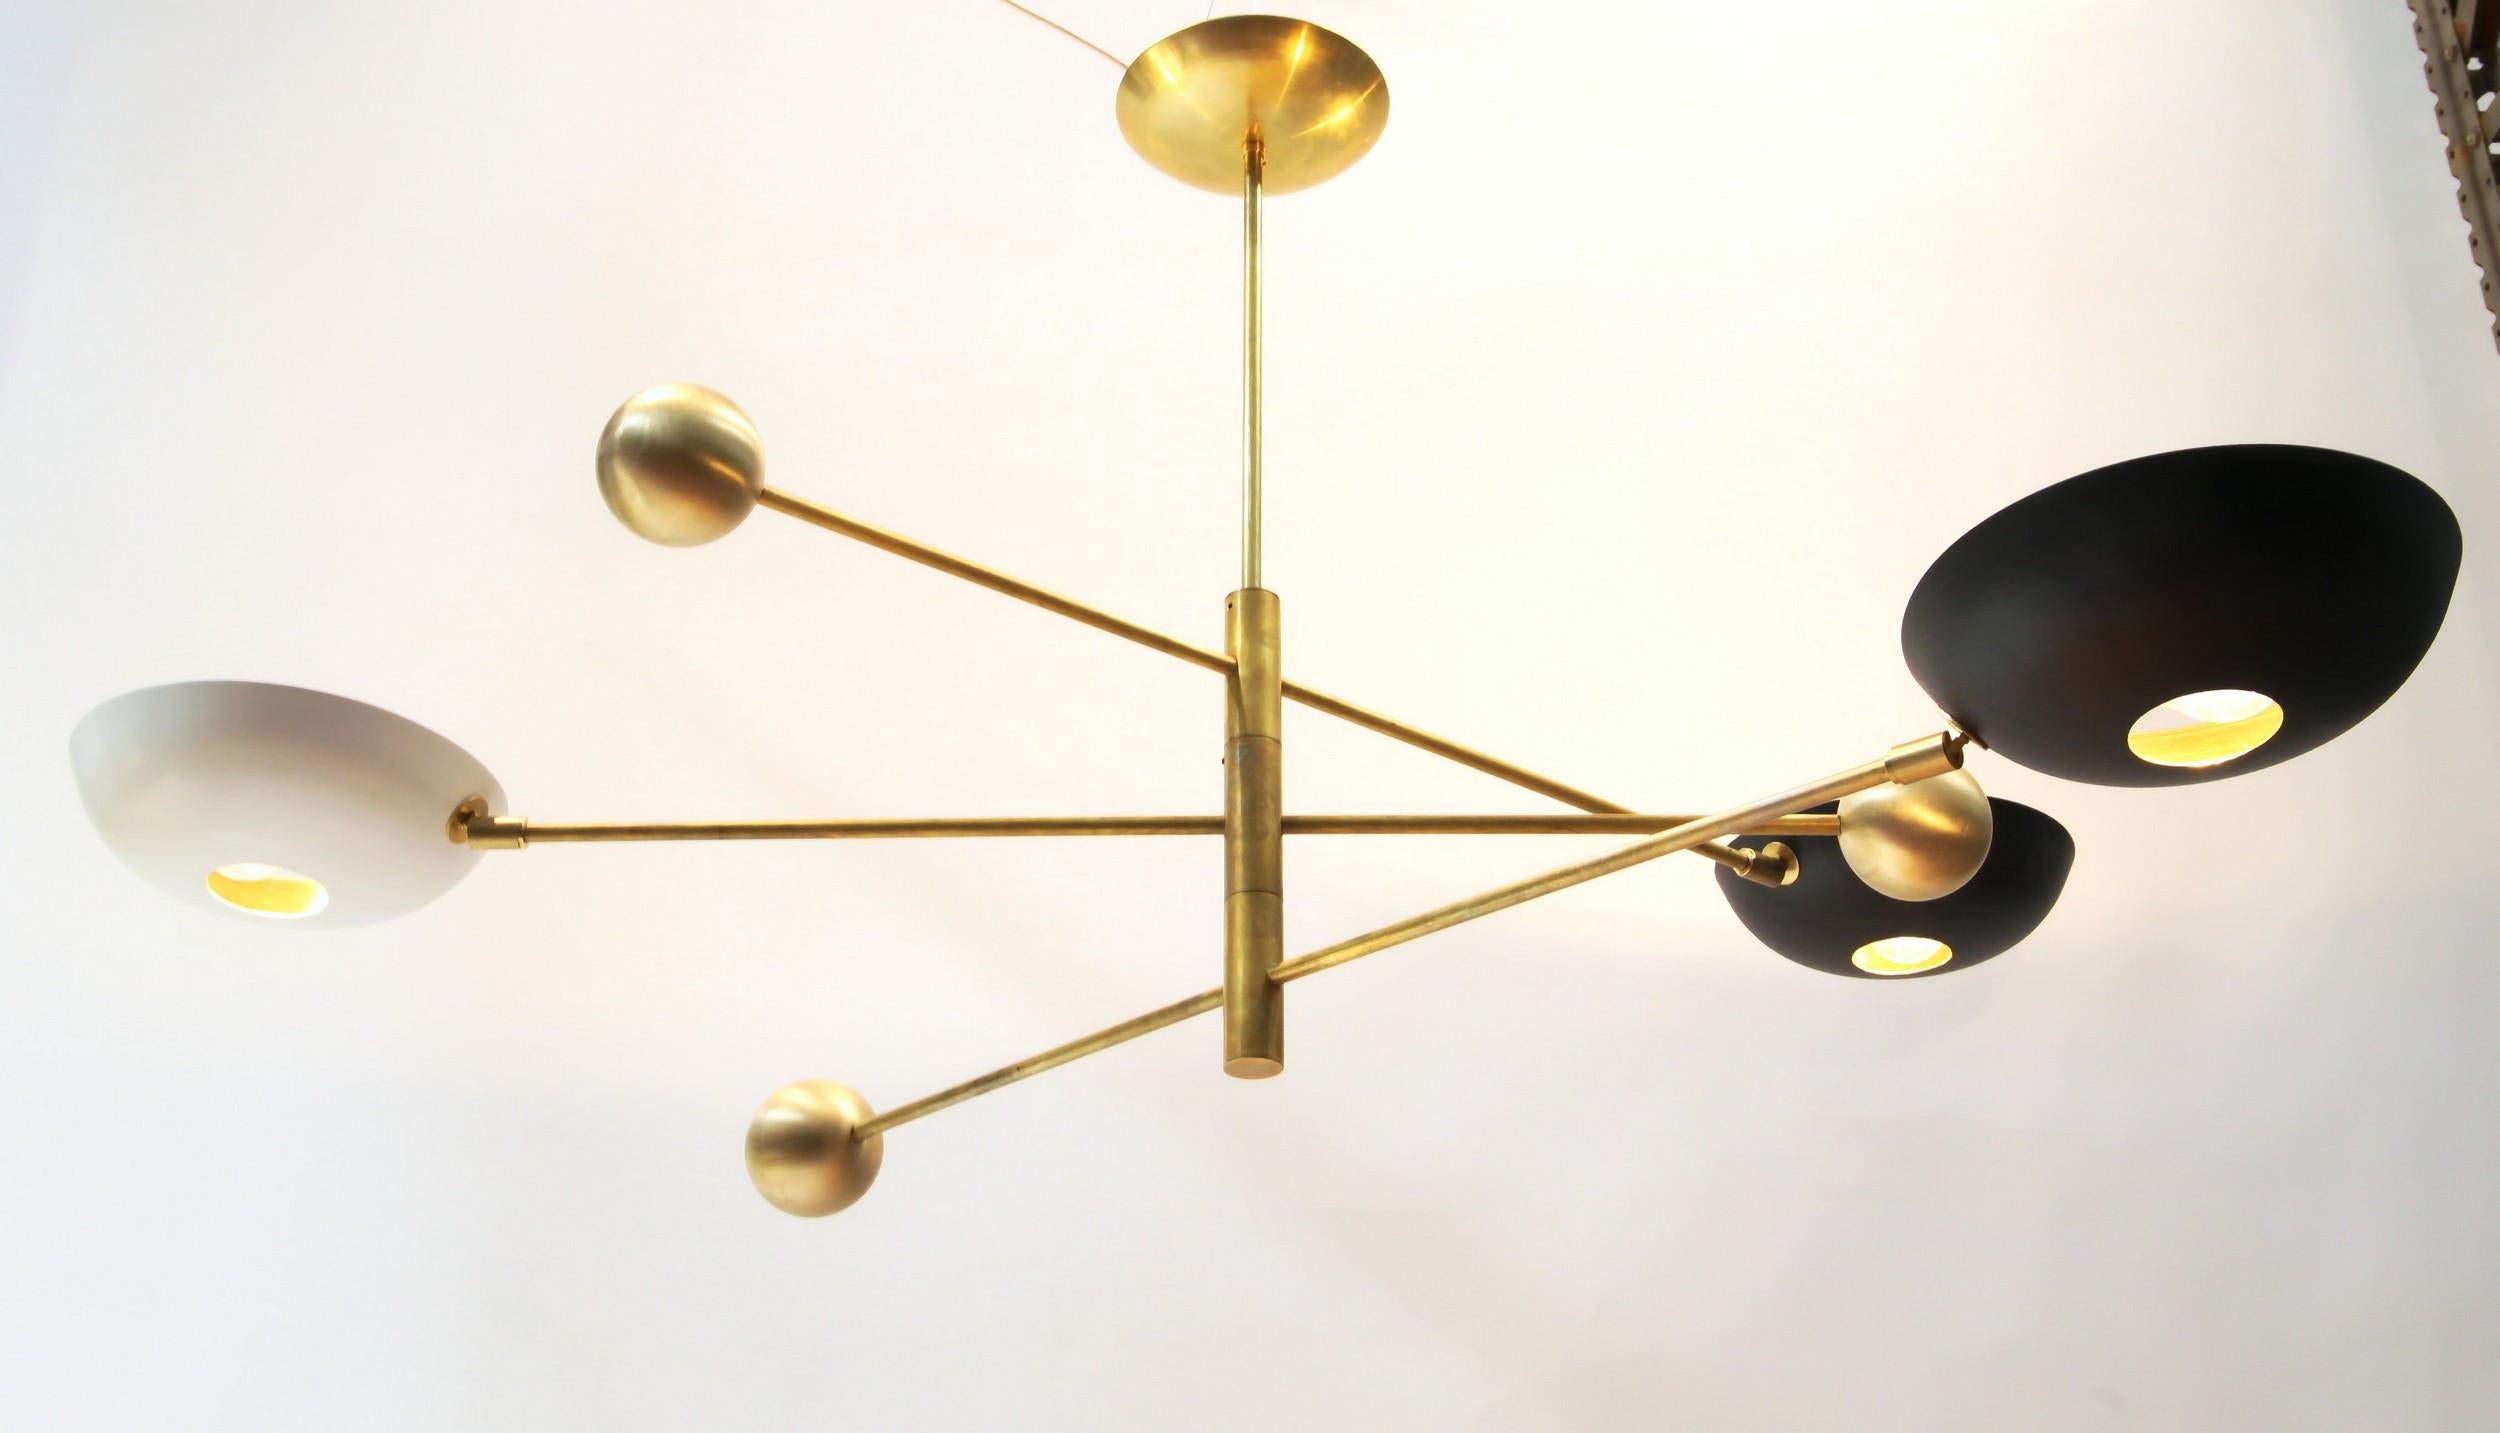 Compact Orbitale Brass Chandelier 3 Rotating Balanced Arms, Low Ceiling Featured For Sale 8